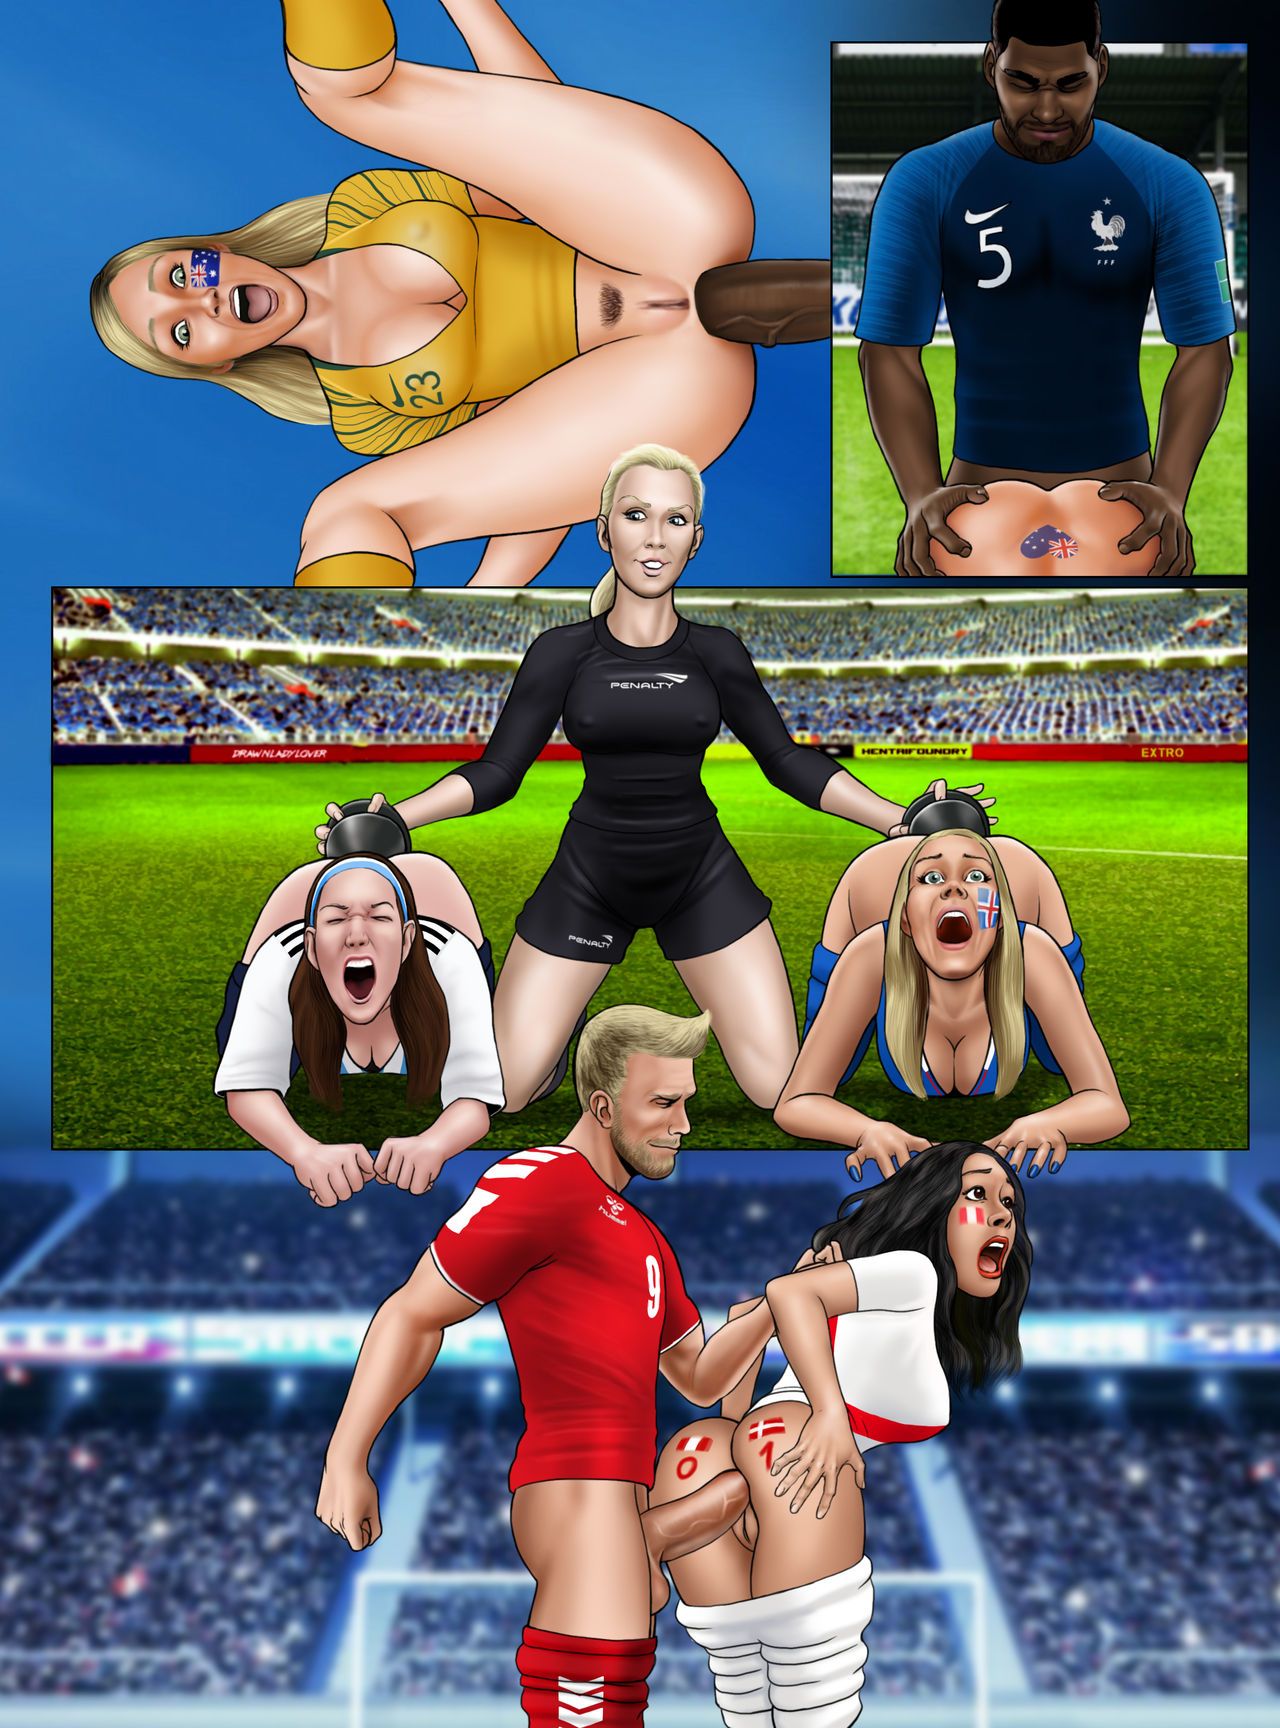 [Extro] FIFA World Cup Russia 2018 - Soccer Hentai - Women's World Cup France 2019 (Ongoing) [Korean] 22